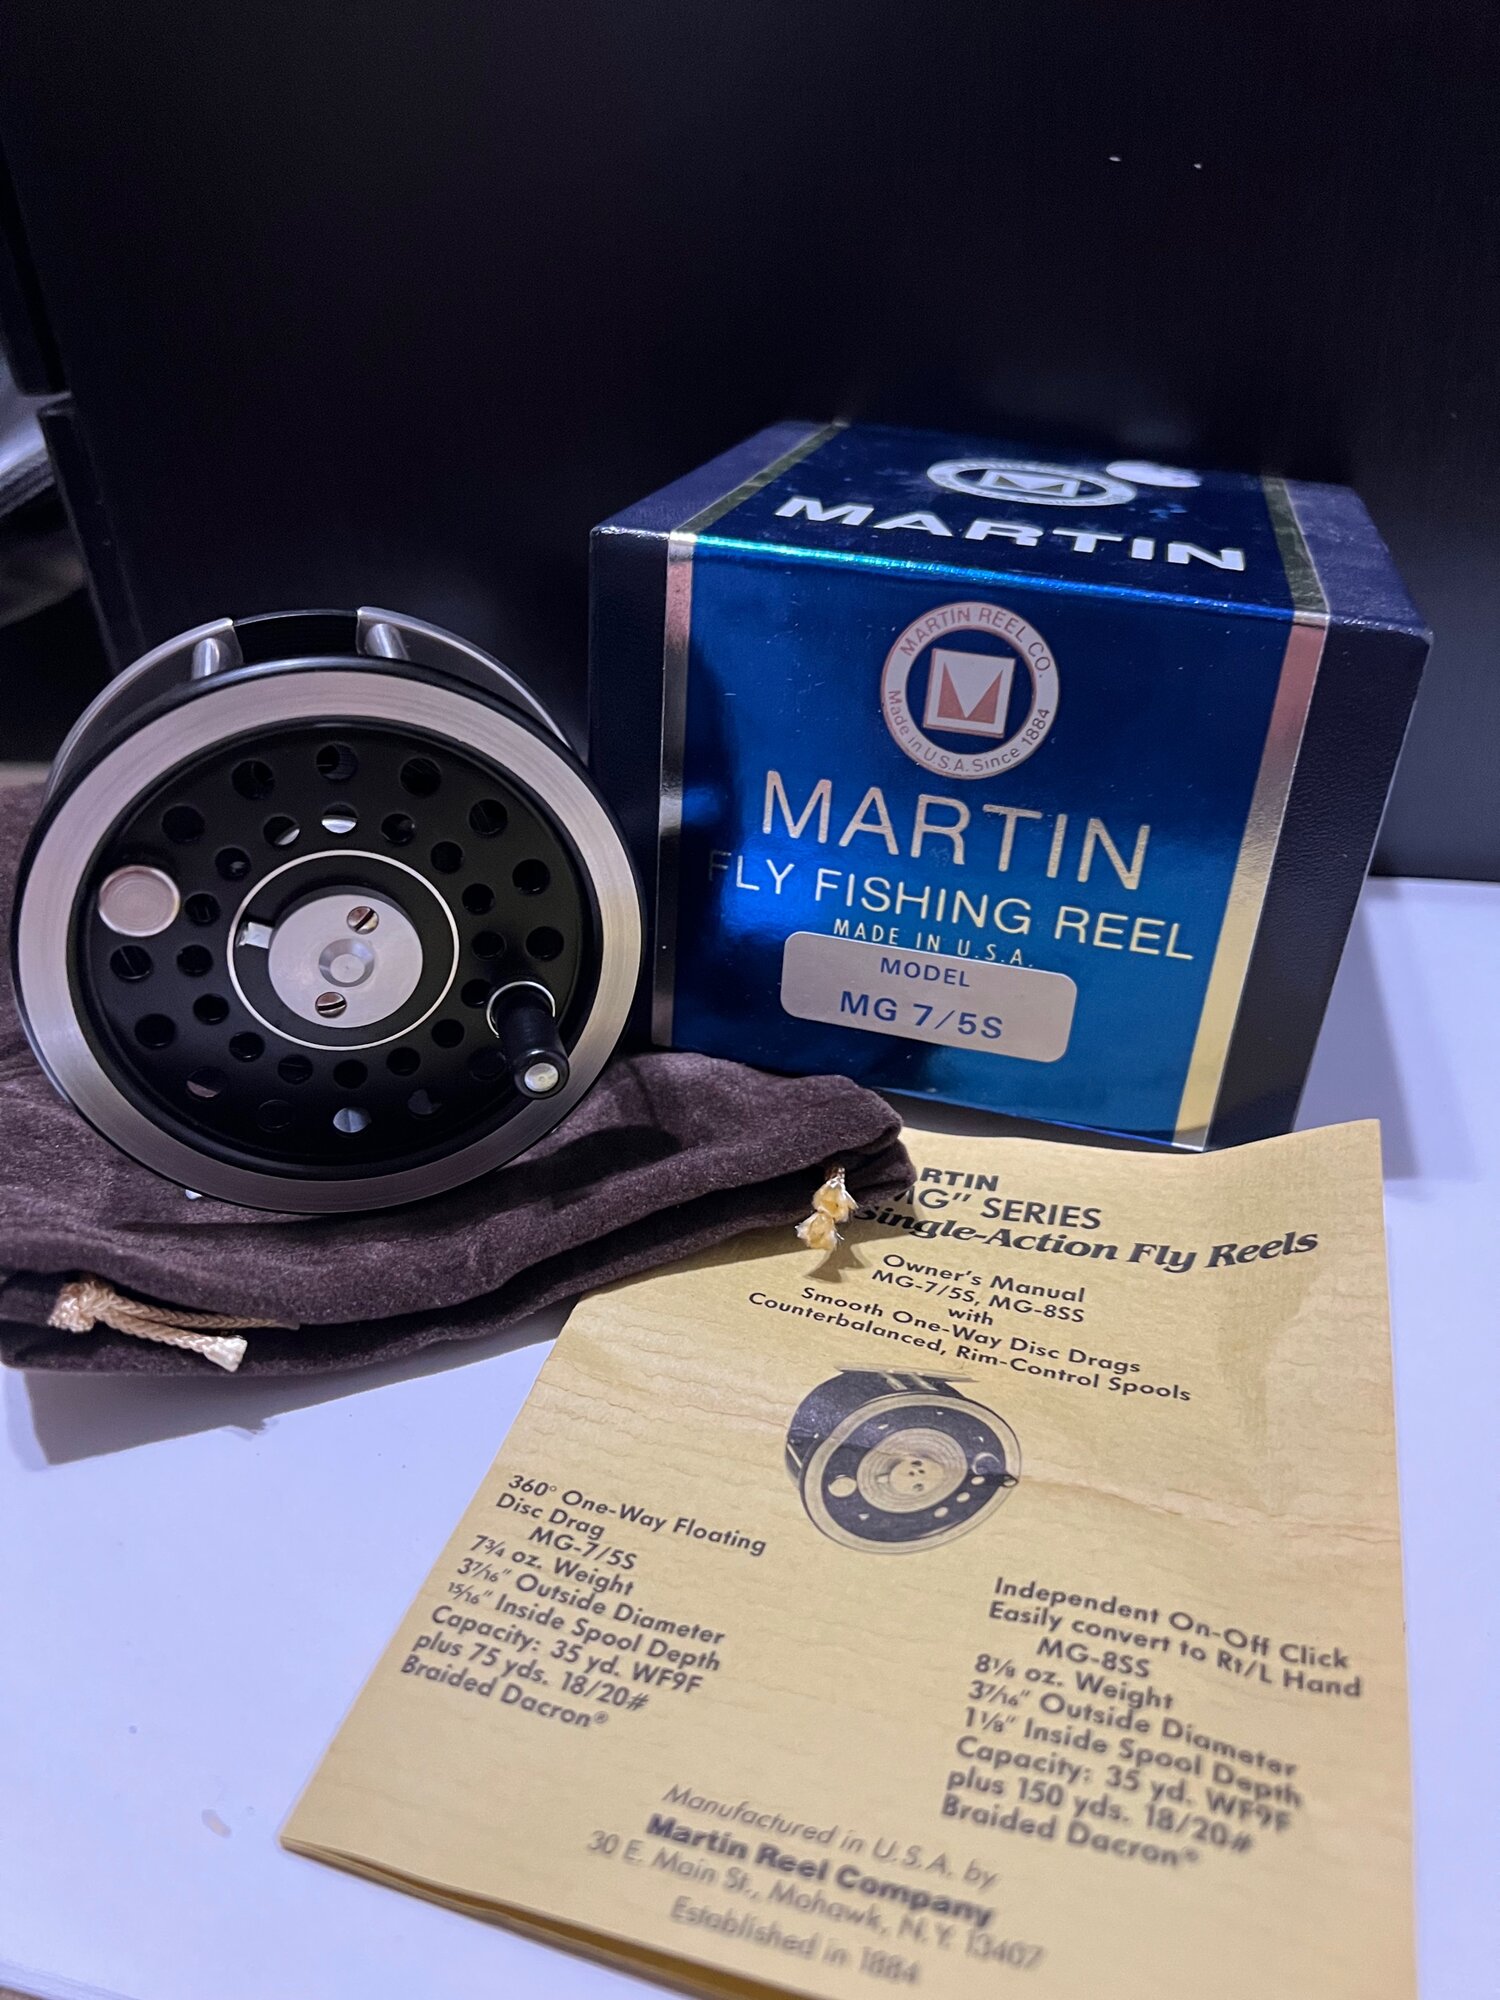 Martin MG-7/5S Fly Reel with Original Box & Carry Bag — VINTAGE FISHING  REELS